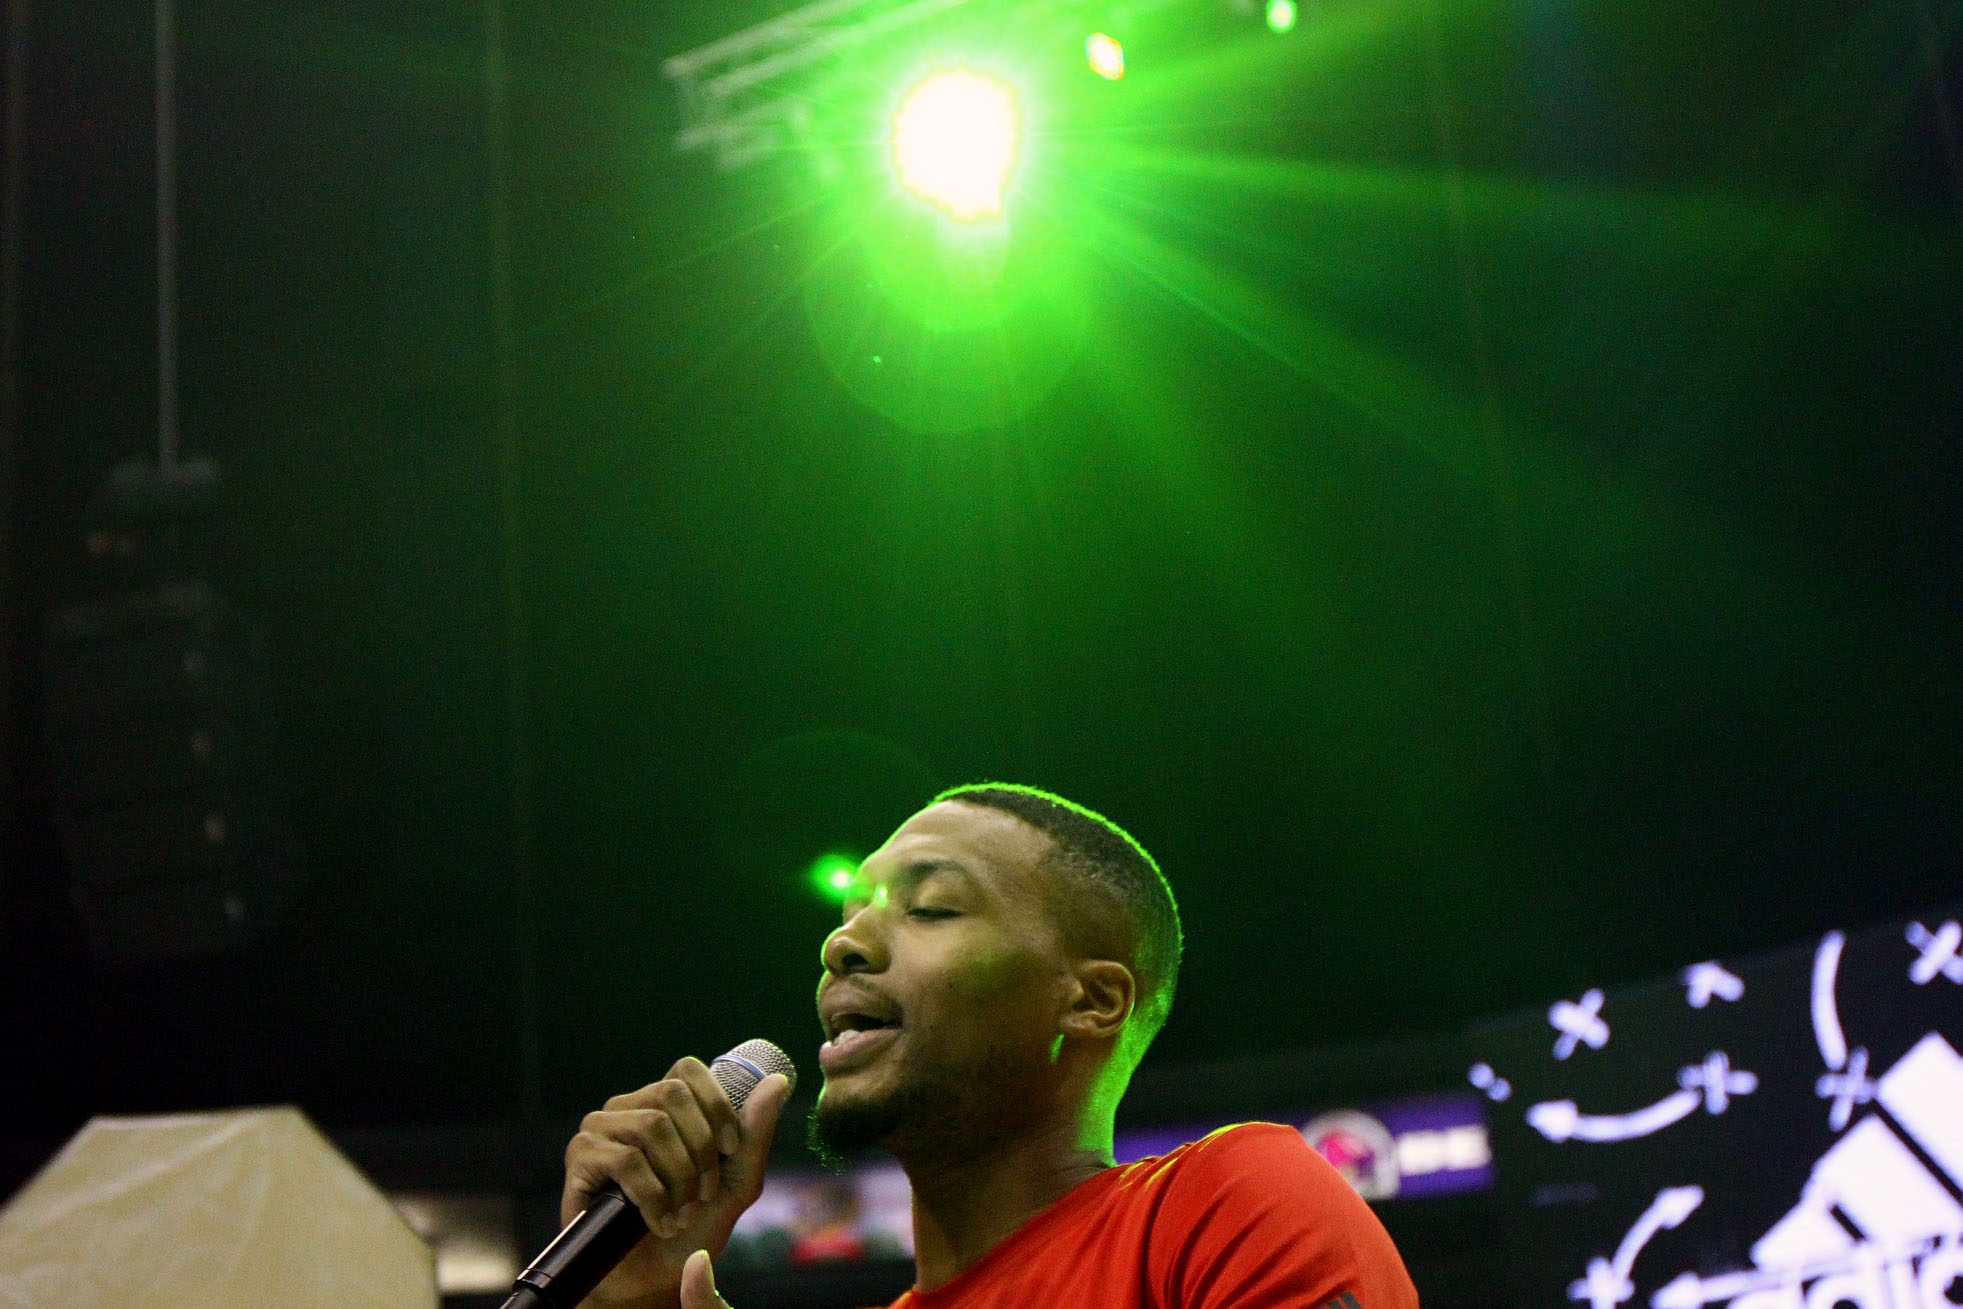 WATCH: Damian Lillard drops the beat and raps in the Philippines